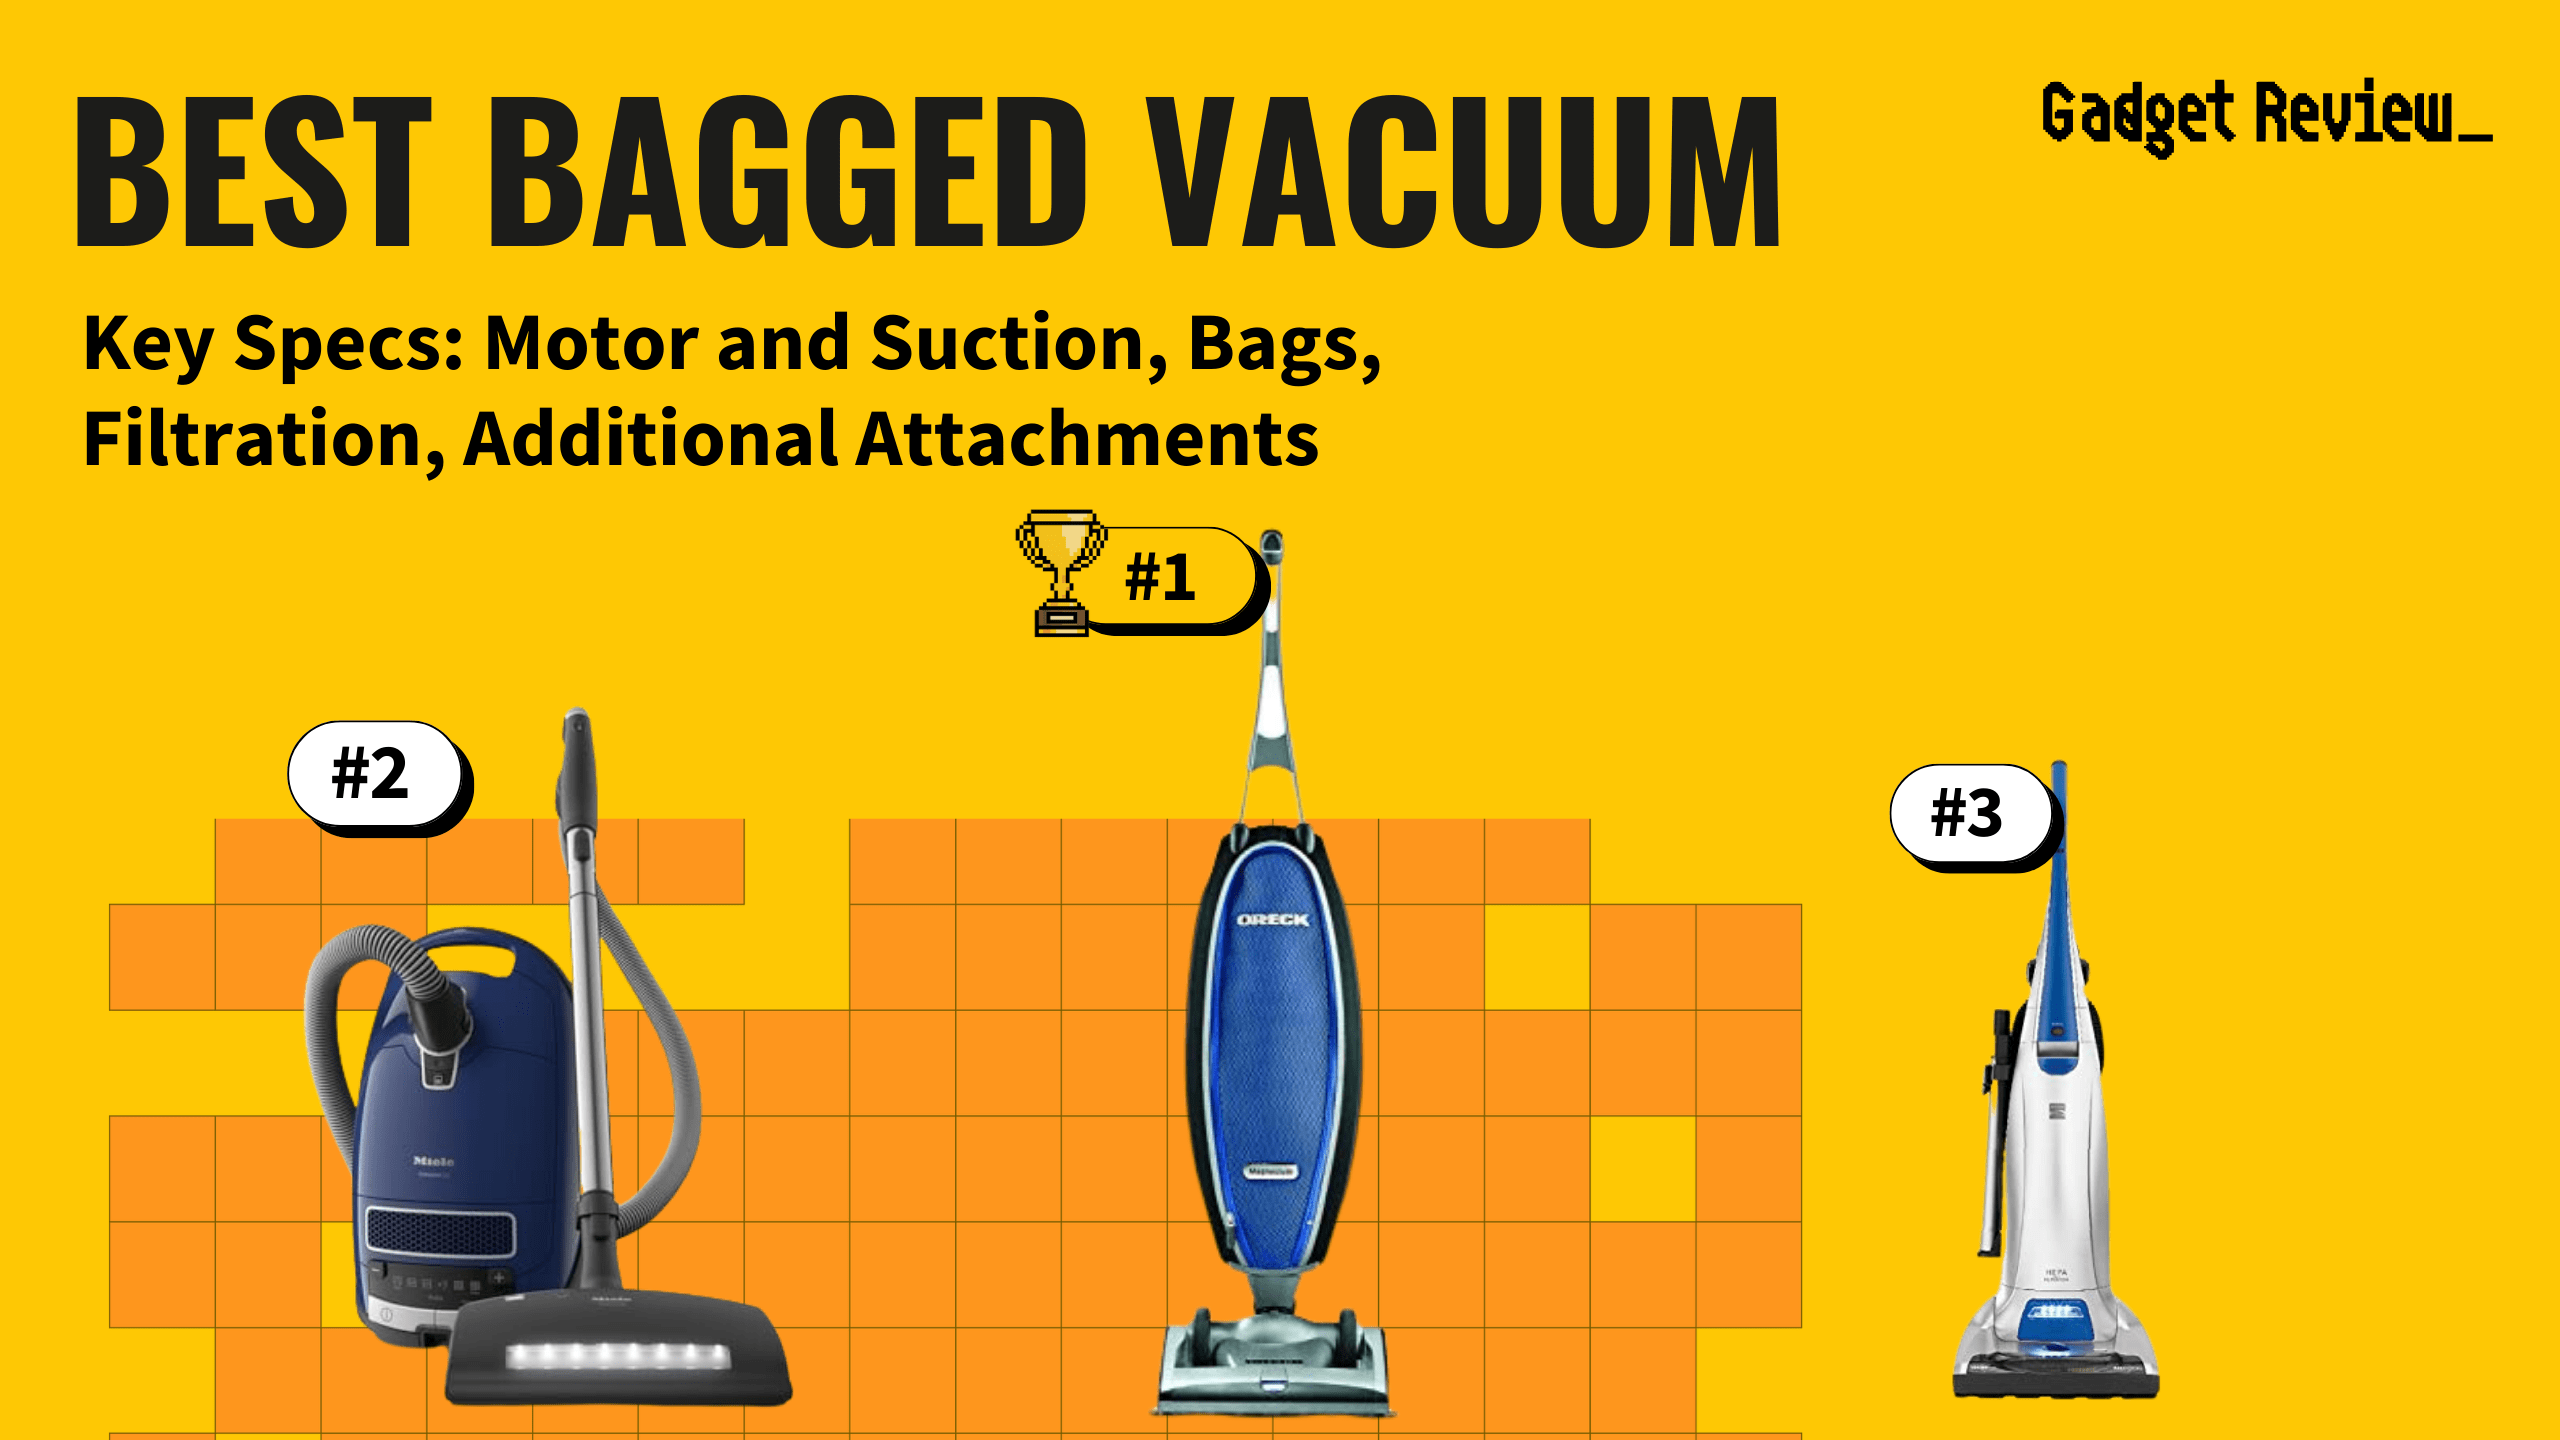 best bagged vacuums guide that shows the top best vacuum cleaner model